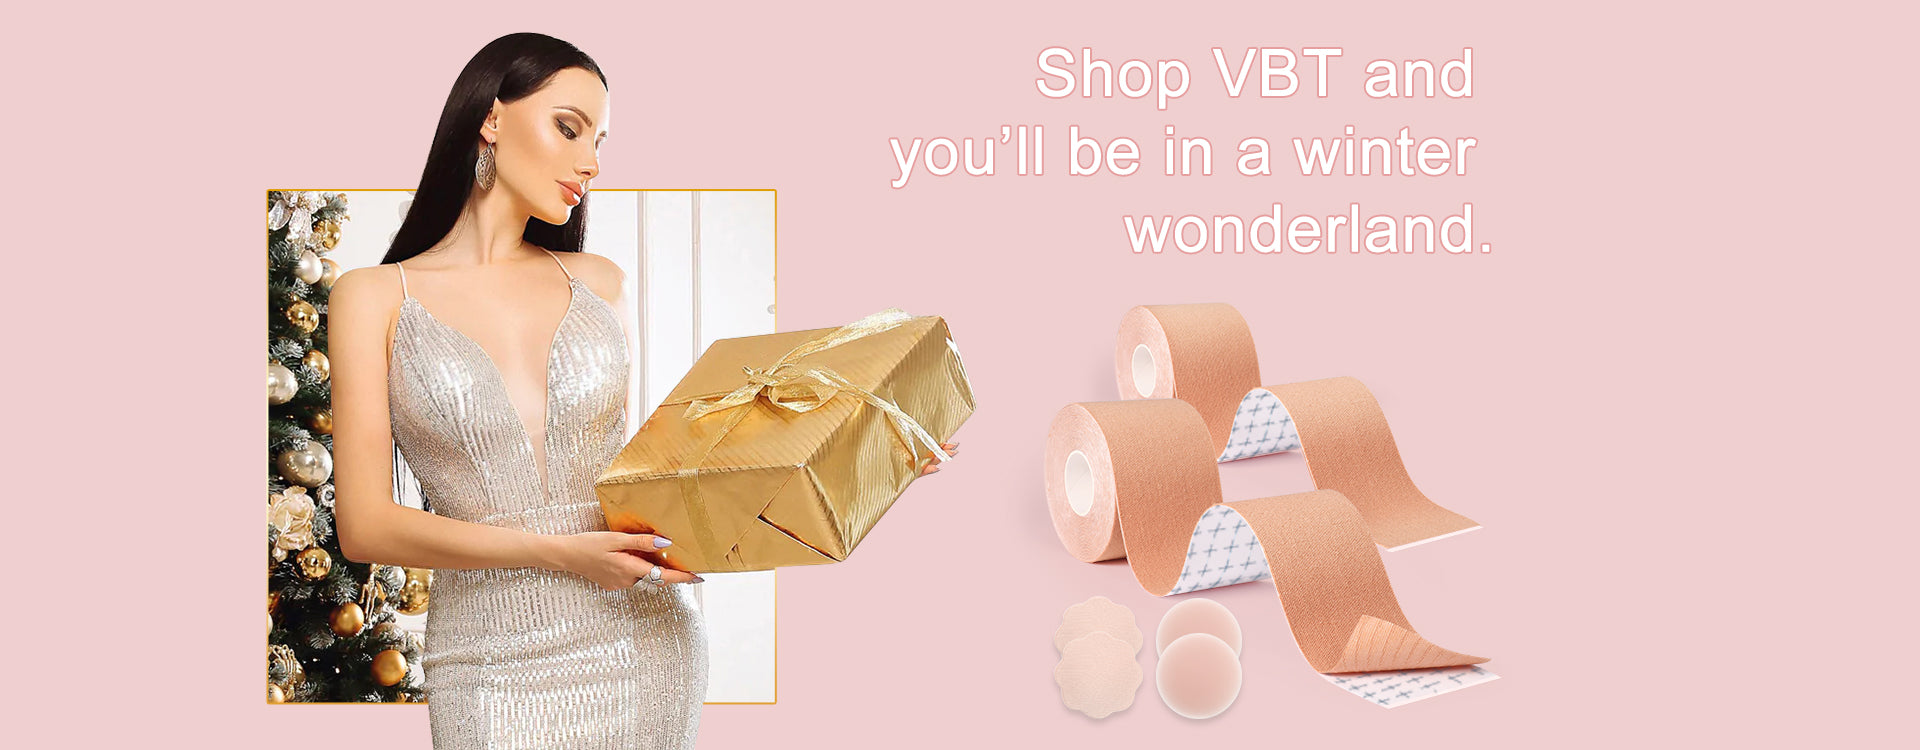 VBT Fashion Double Sided Clothing Tape, Transparent 100 Strips – VBT BOOB  TAPE